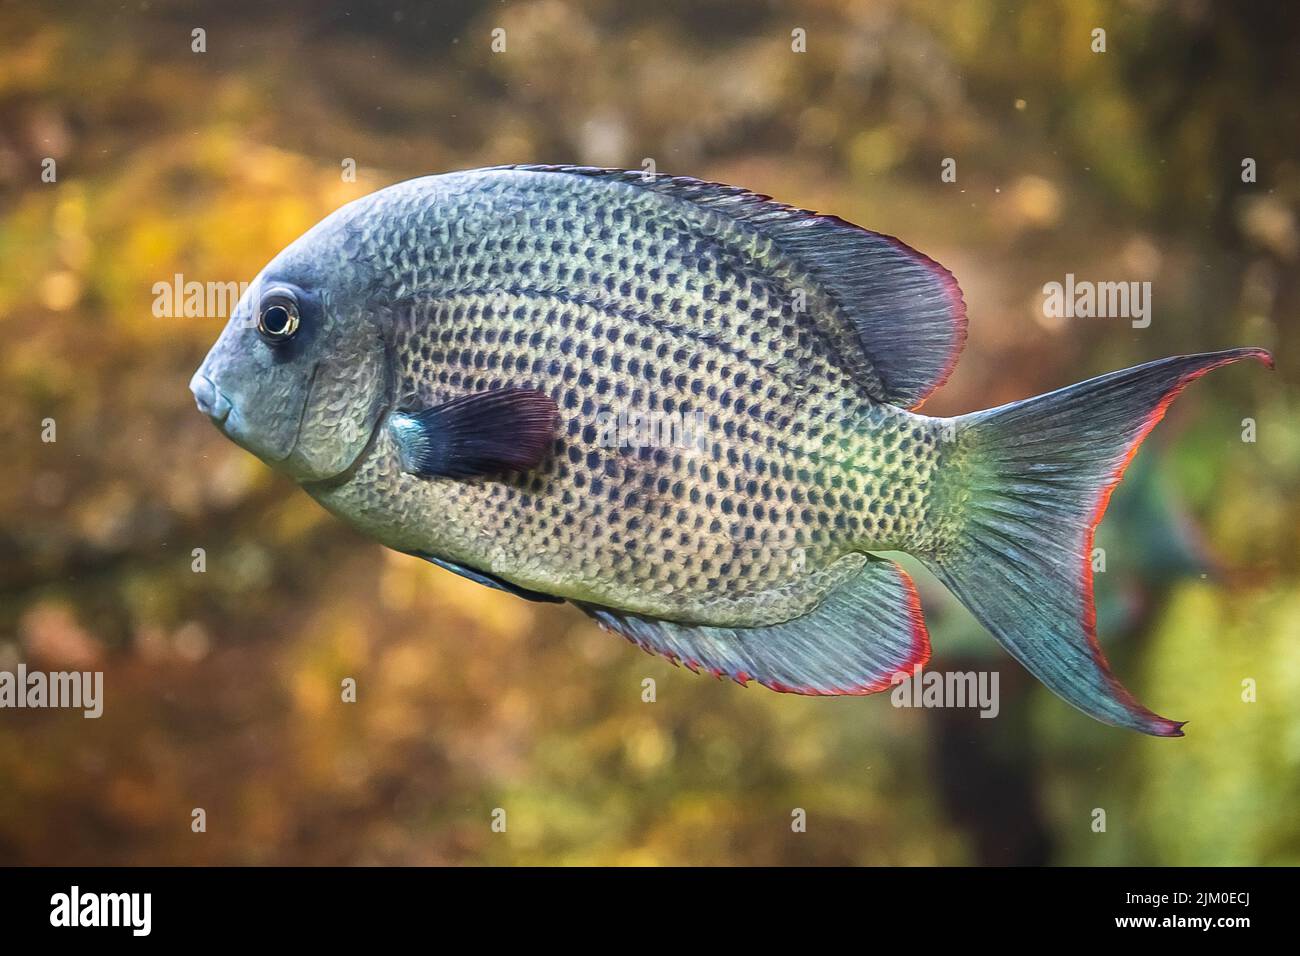 A closeup shot of an African cichlid fish swimming underwater Stock Photo